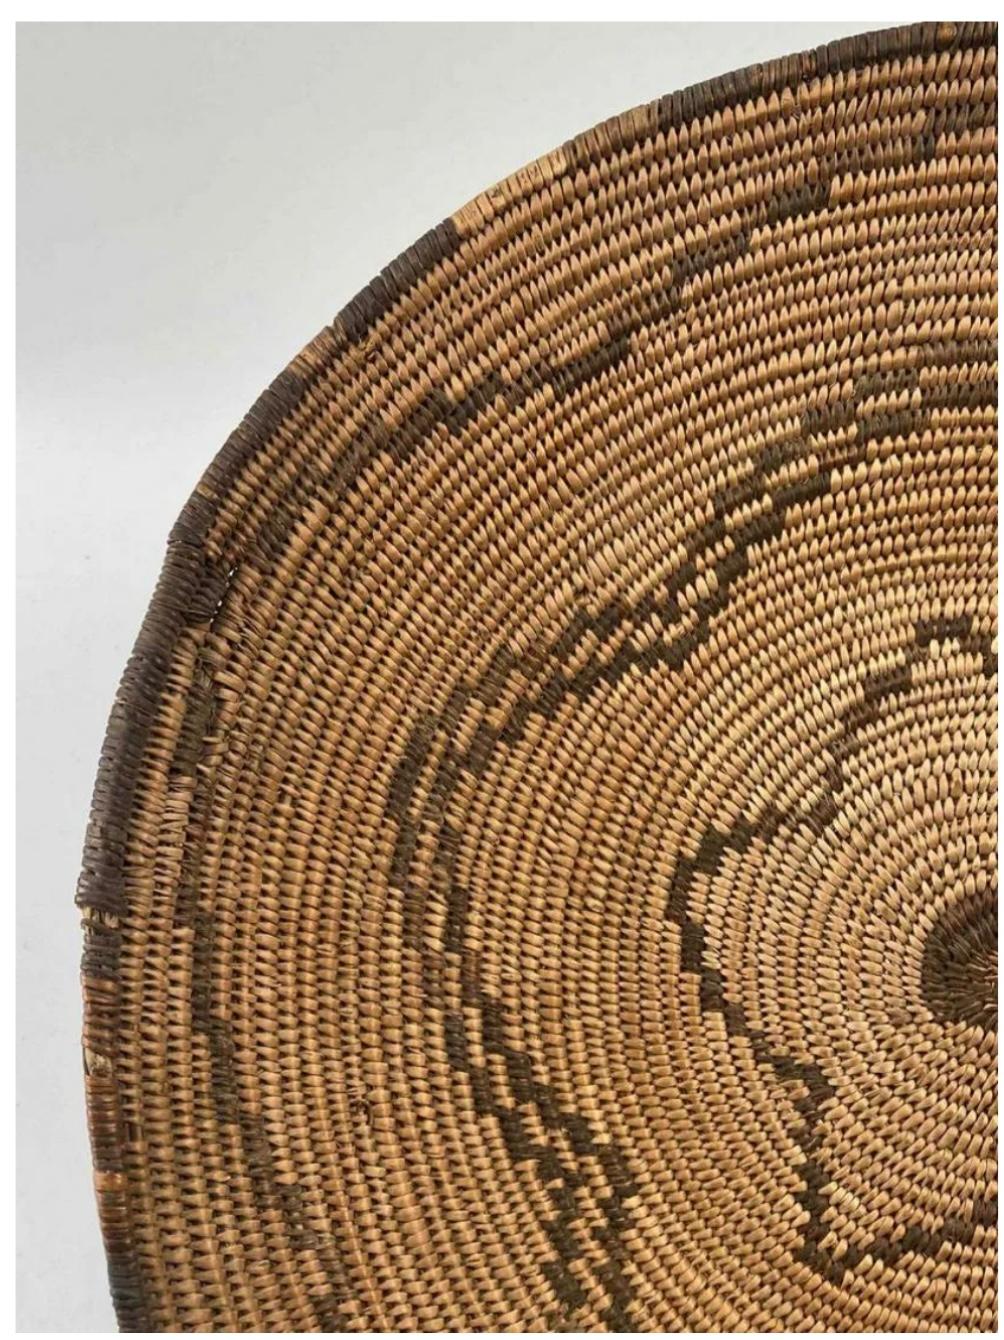 Antique Native American Apache woven basket. Handcrafted and made from all natural fibers including Devil's claw, willow, and yucca root.